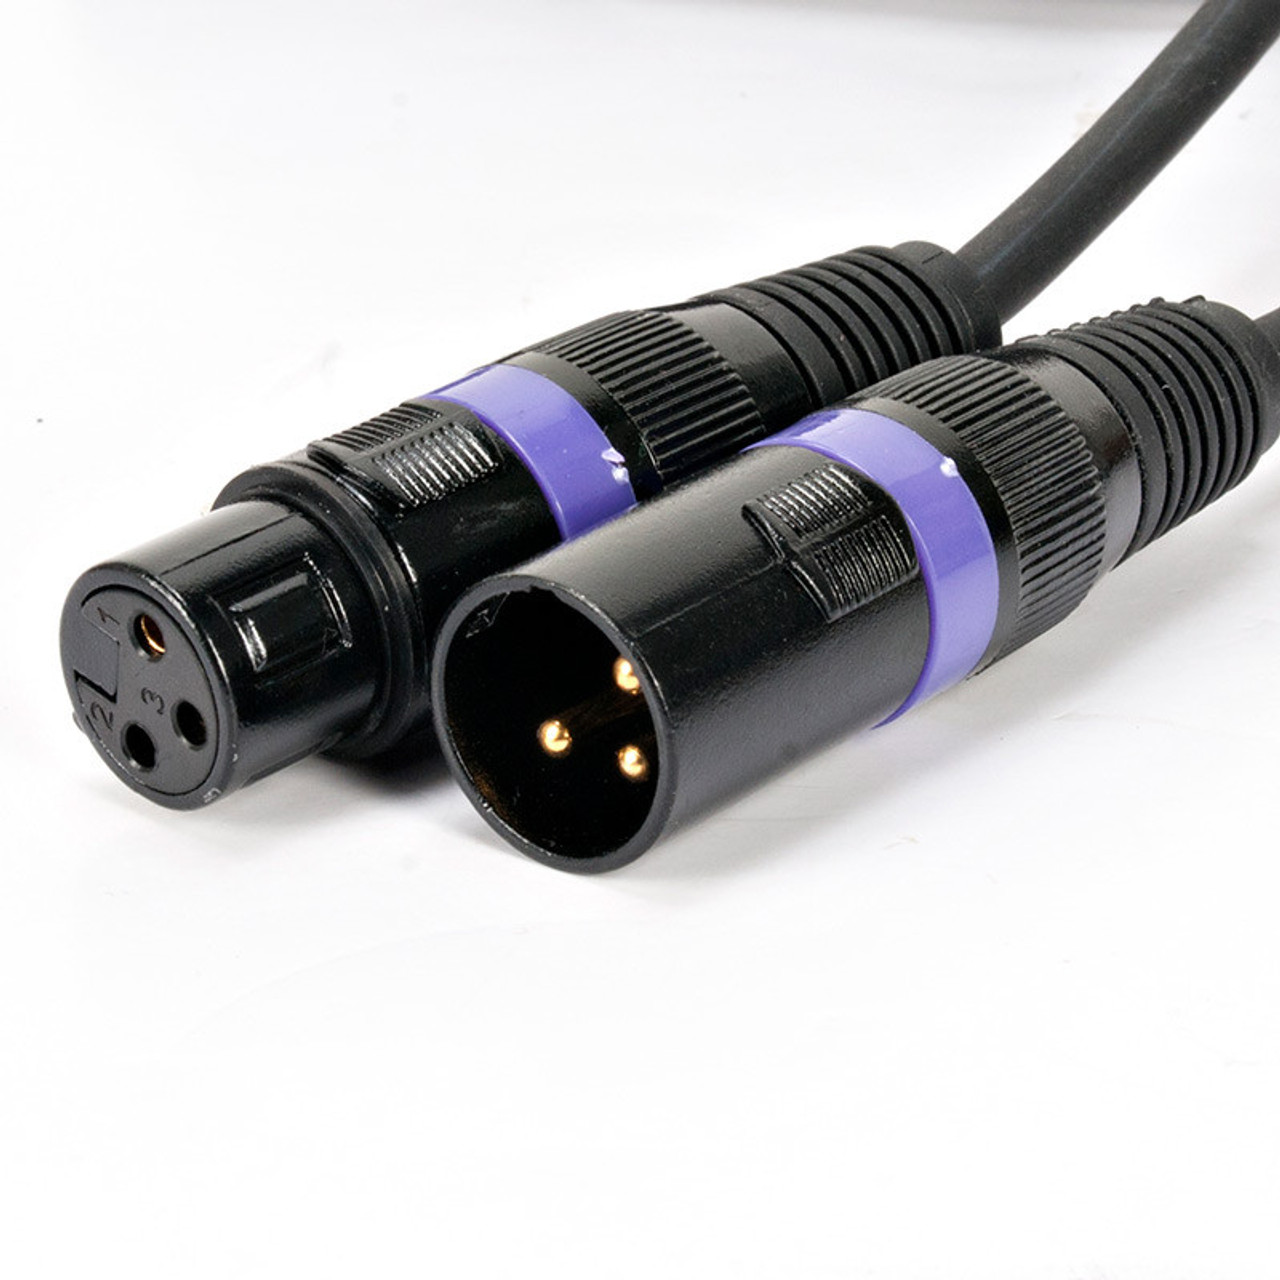 Elation ACCU-CABLE 5pin Pro DMX cable - Professional Series